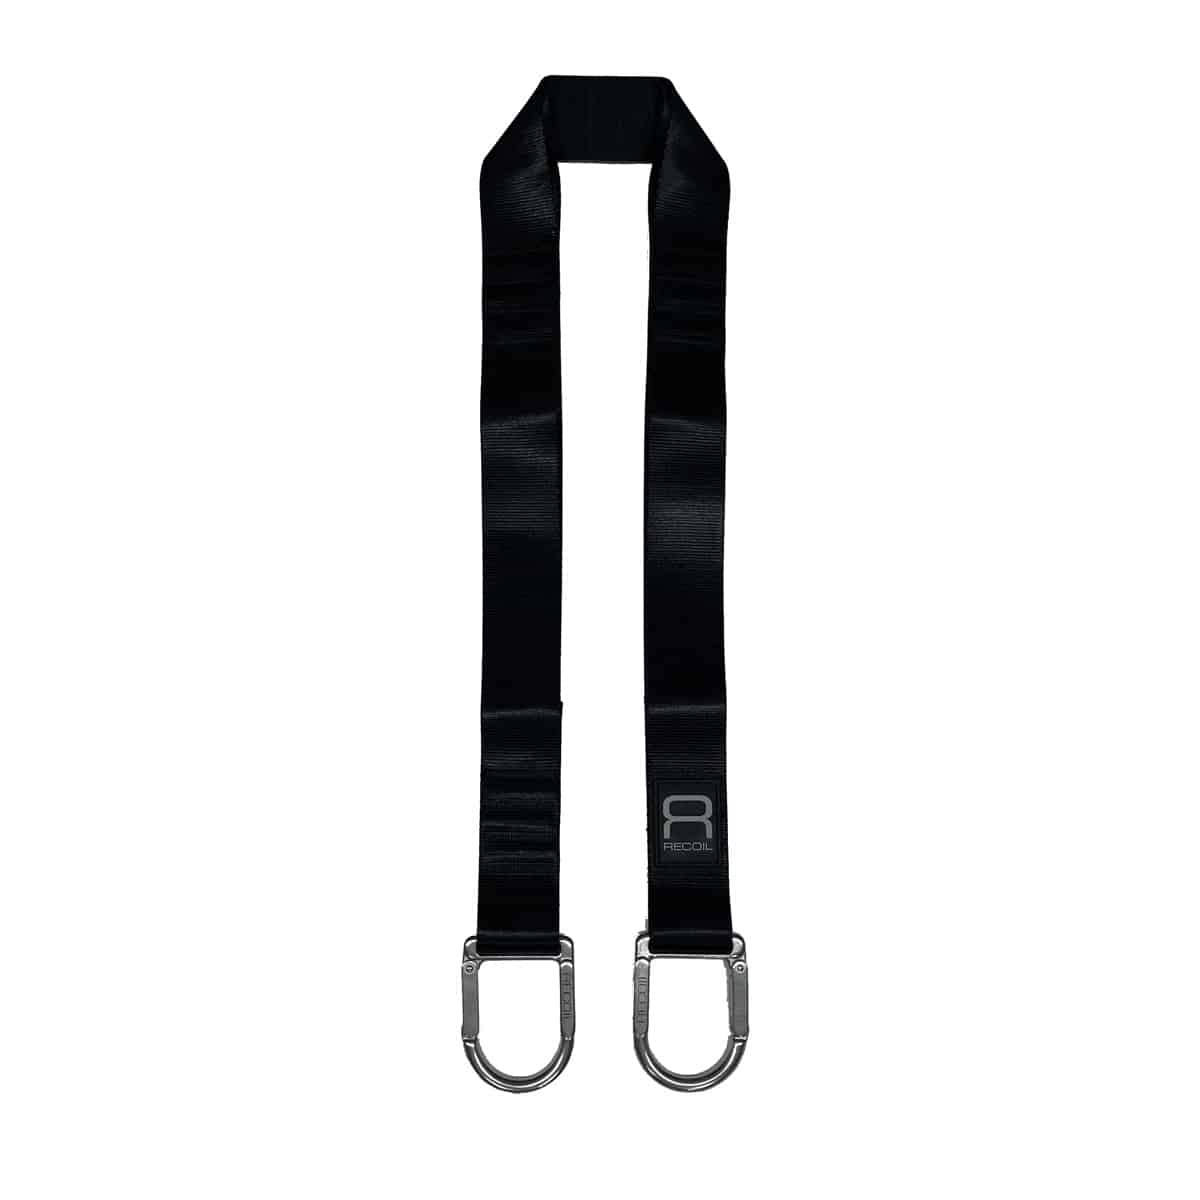 Buckles for lashing straps - Conservatis